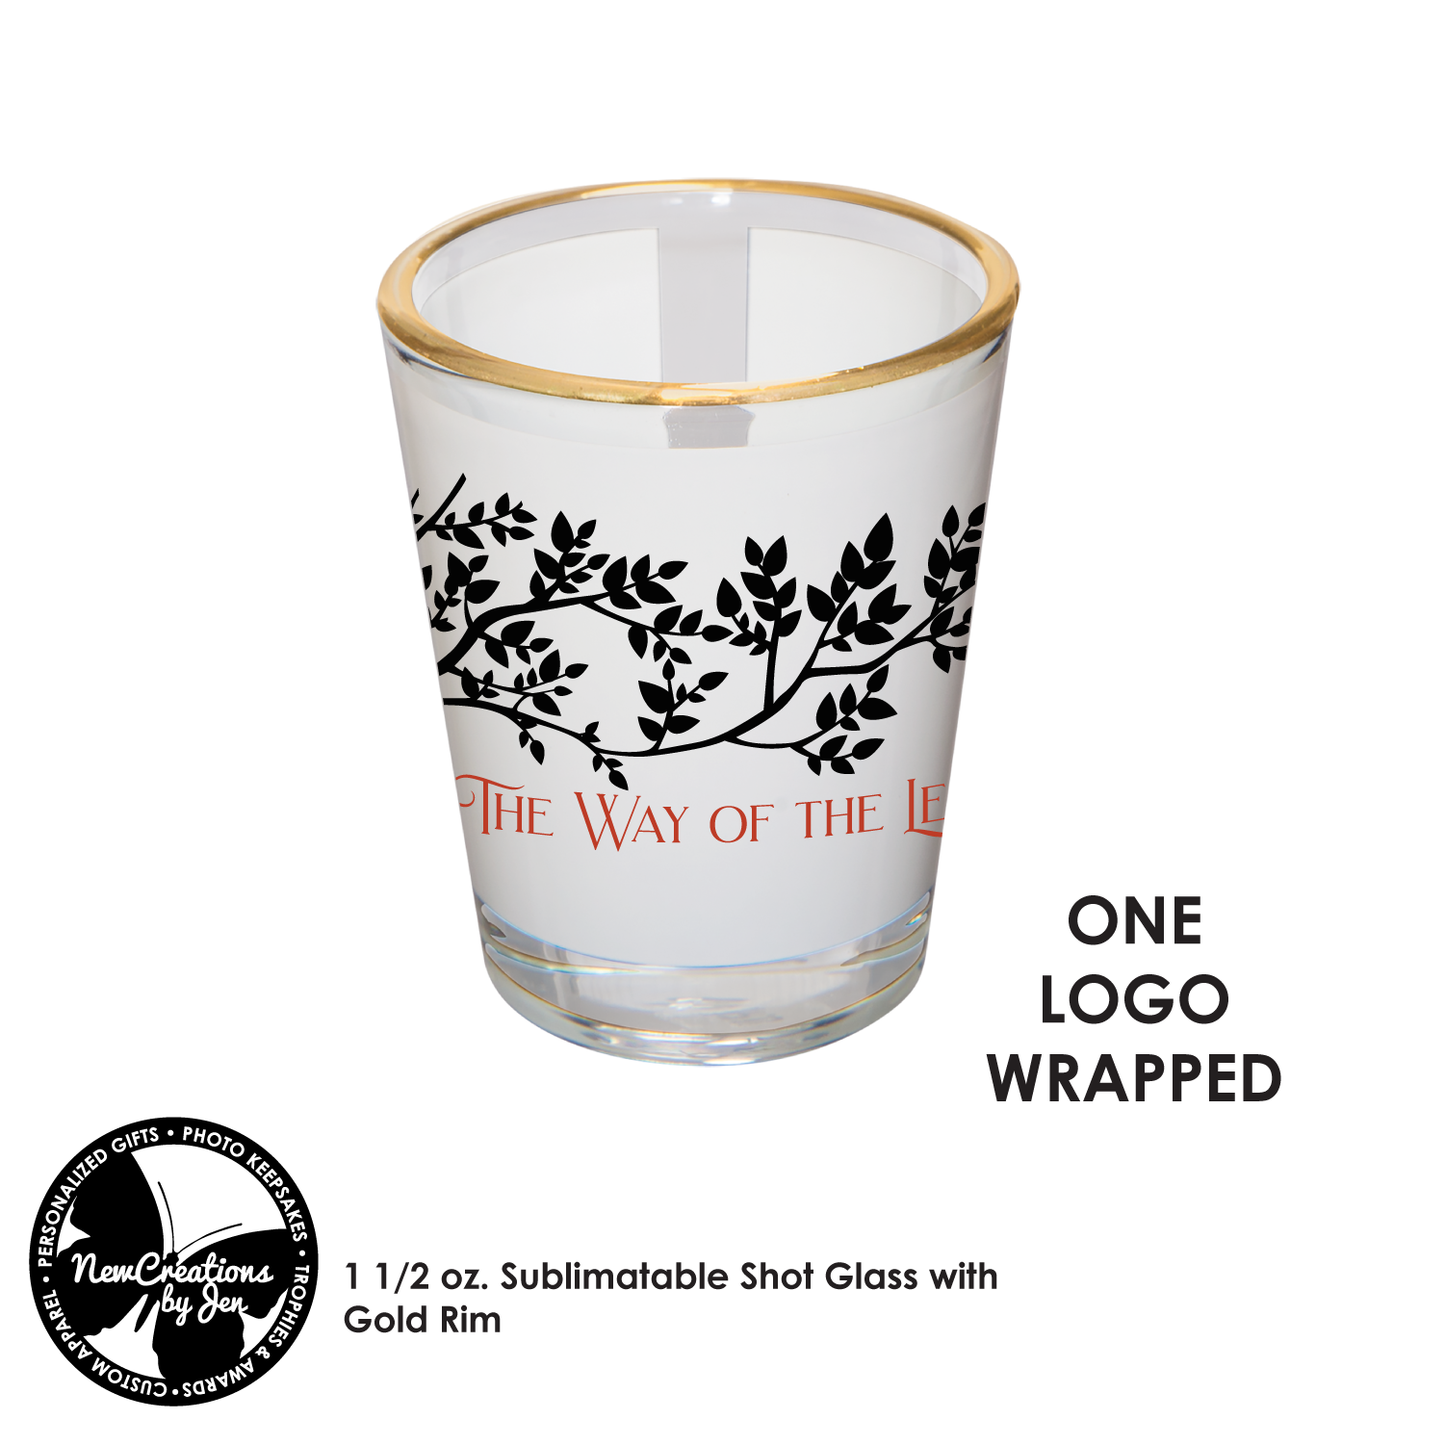 The Way of the Leaf - Shot Glass